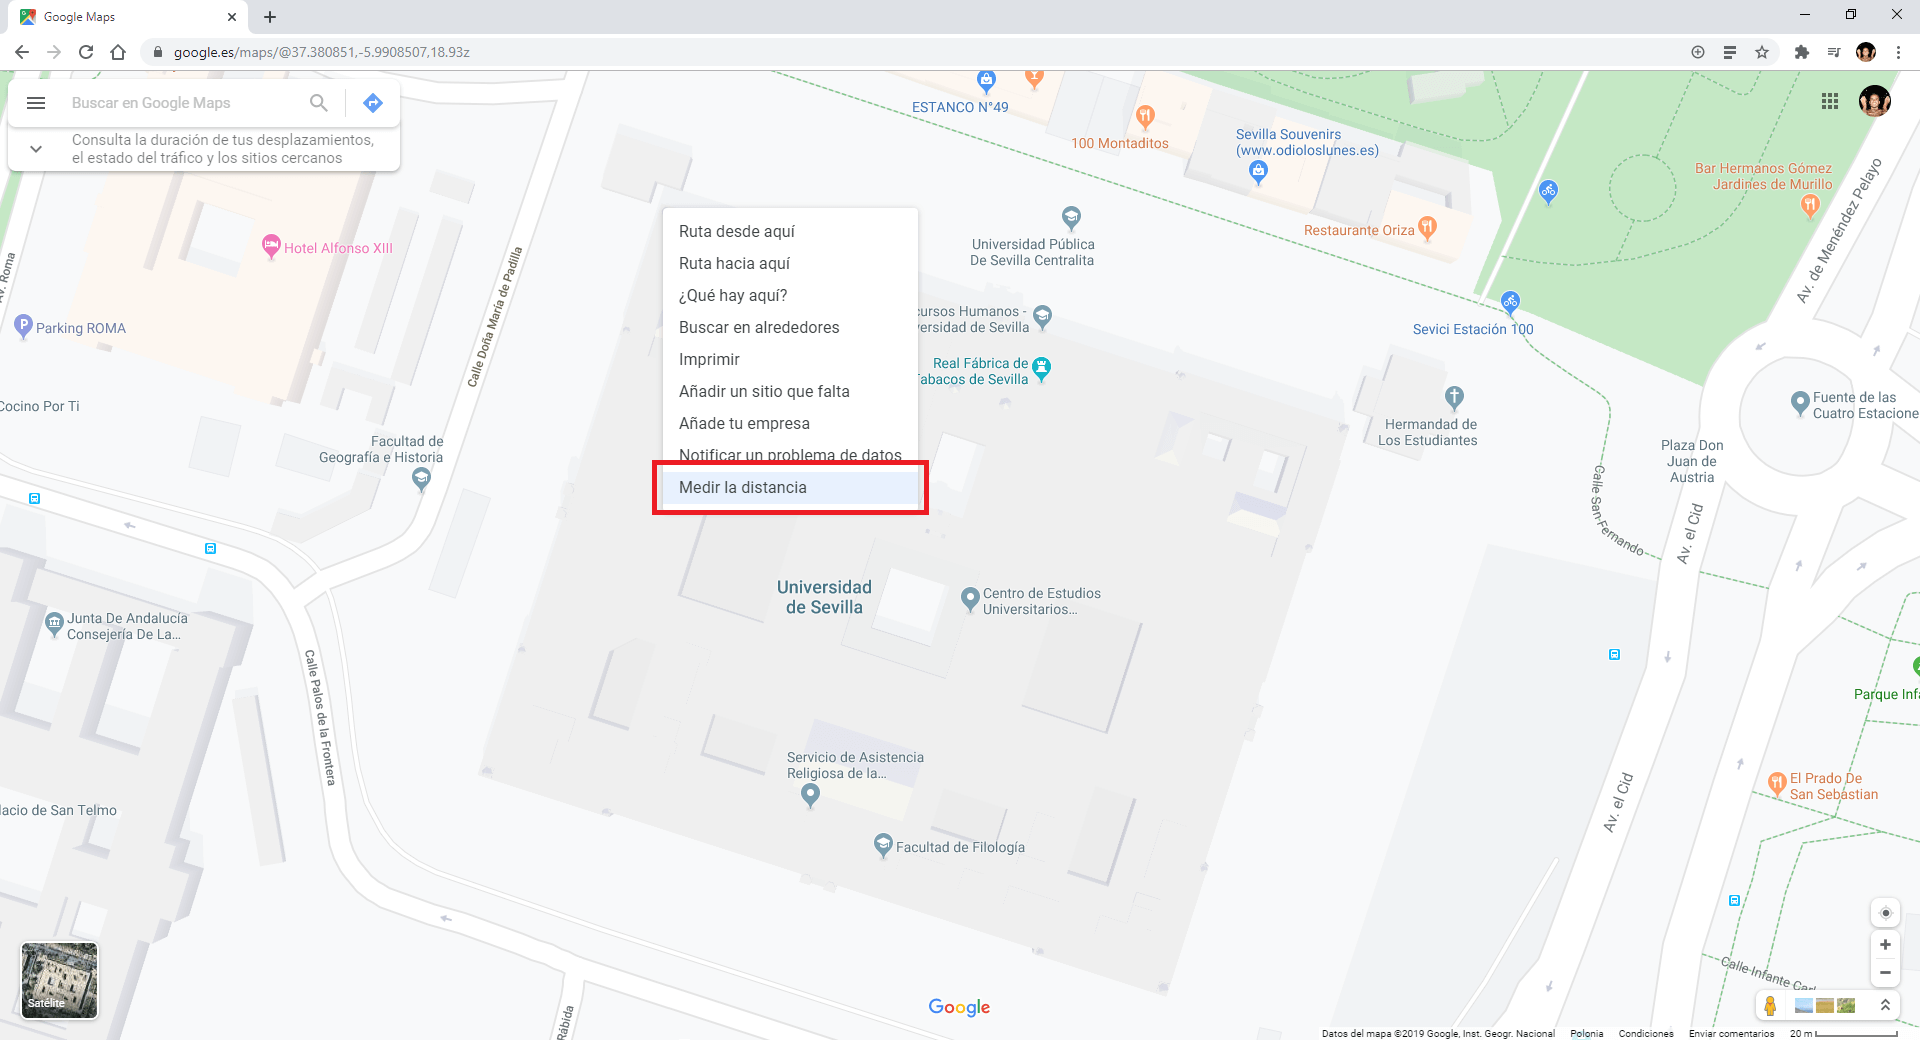 how to measure the square meters of an area in Google maps